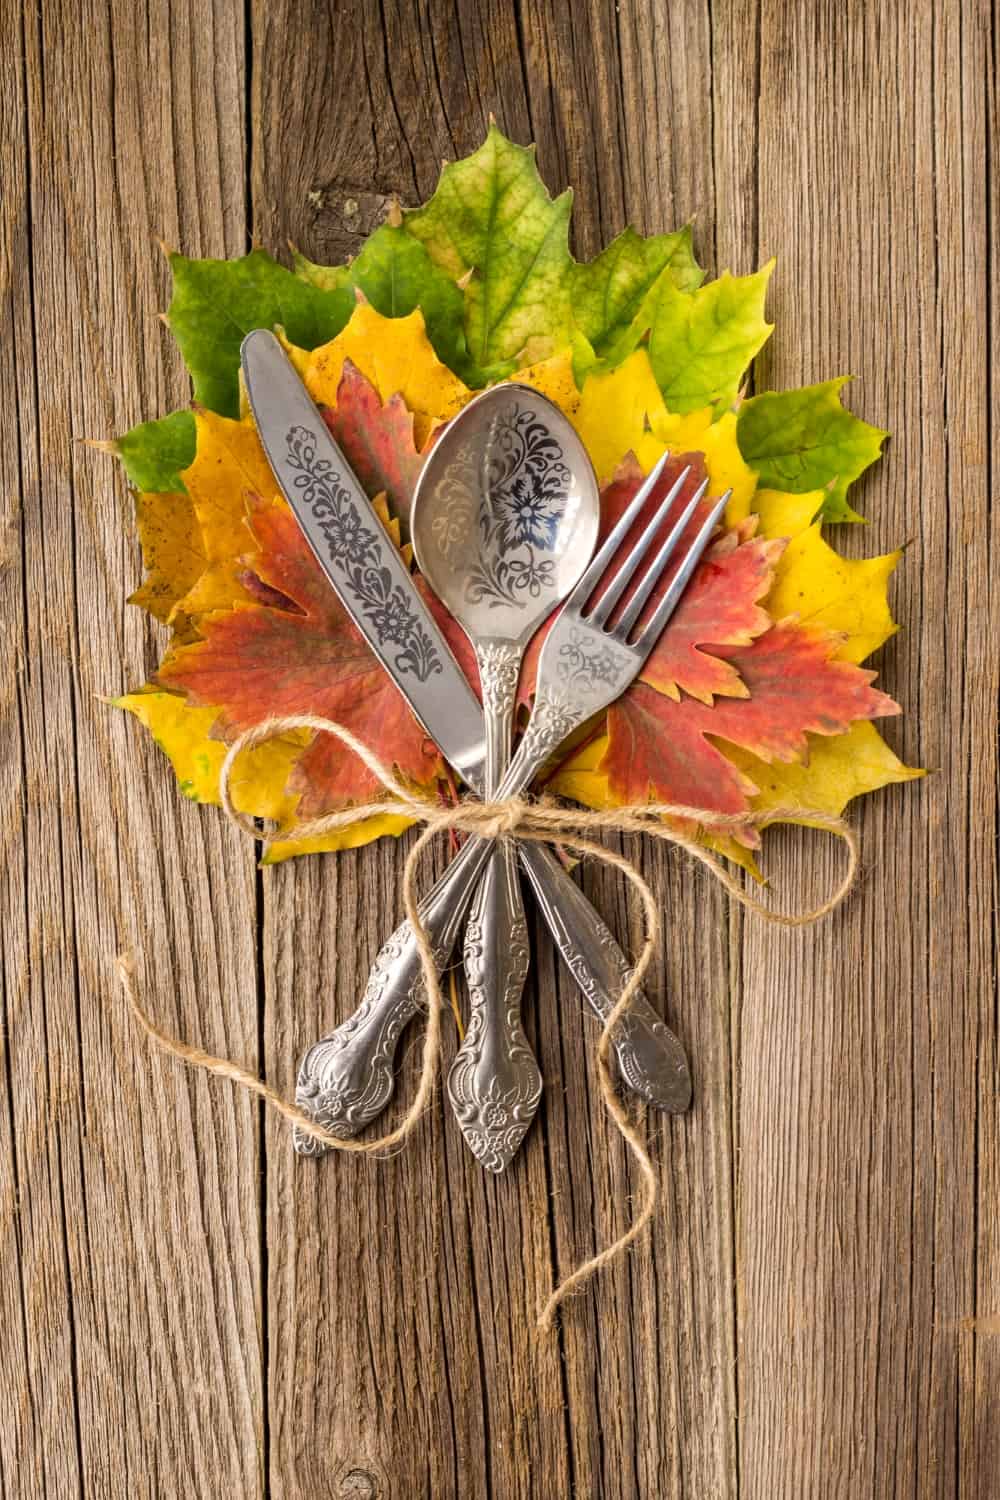 vintage silverware with faux leaves and string